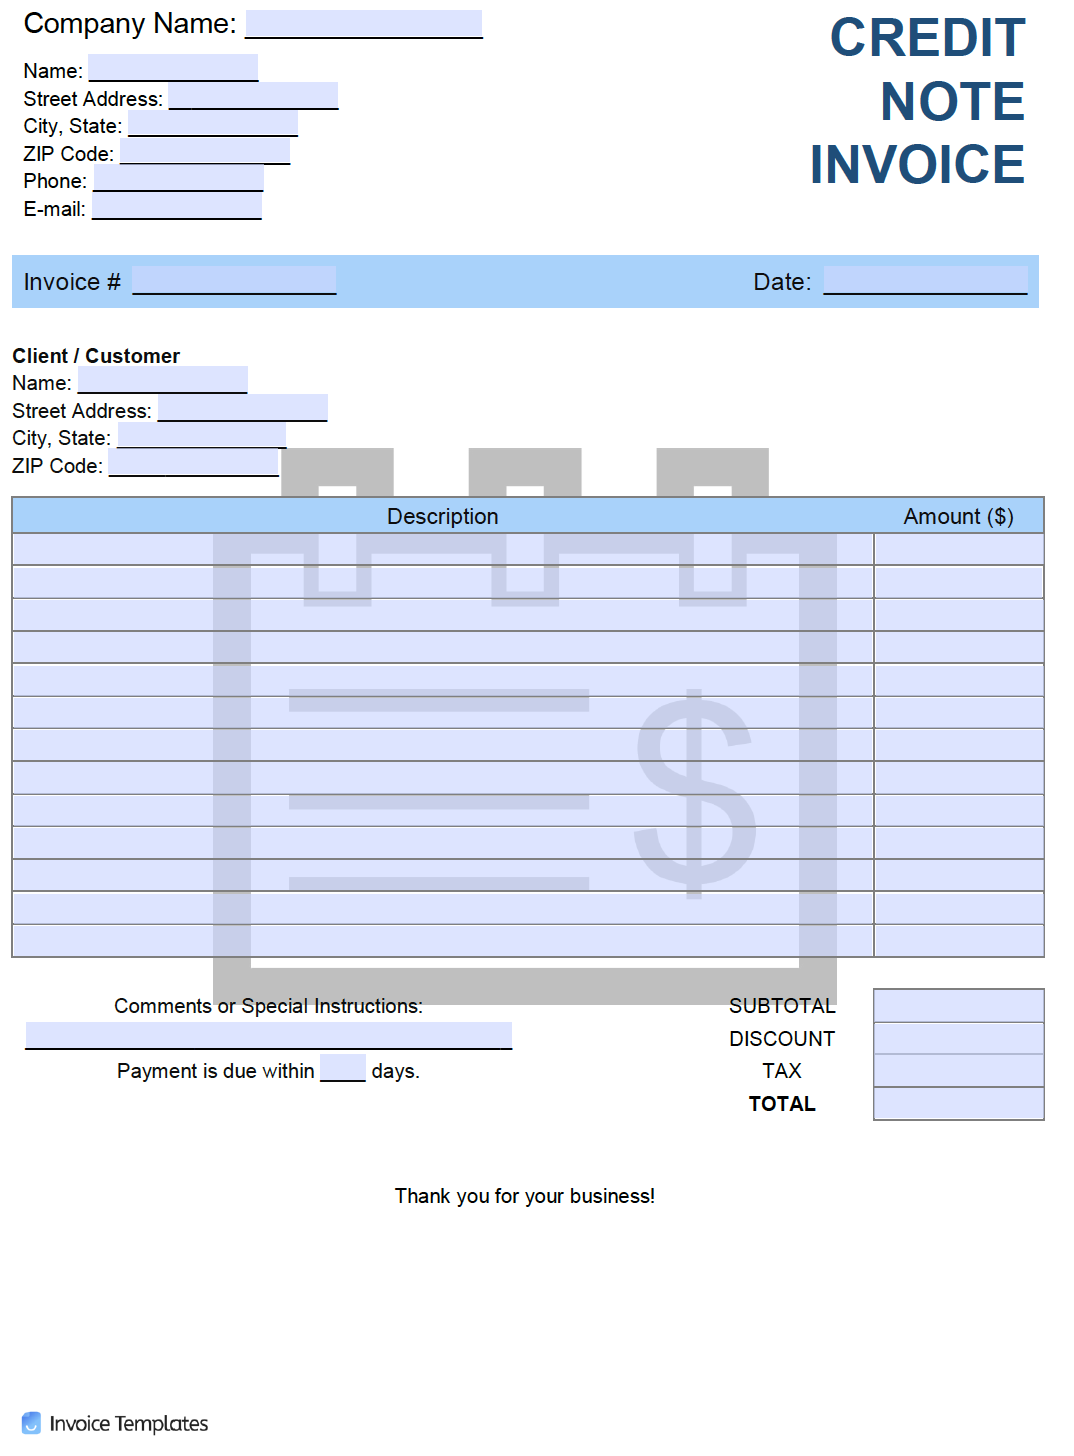 Free Credit (Note) Invoice Template  PDF  WORD  EXCEL Throughout Credit Note Template On Word Download